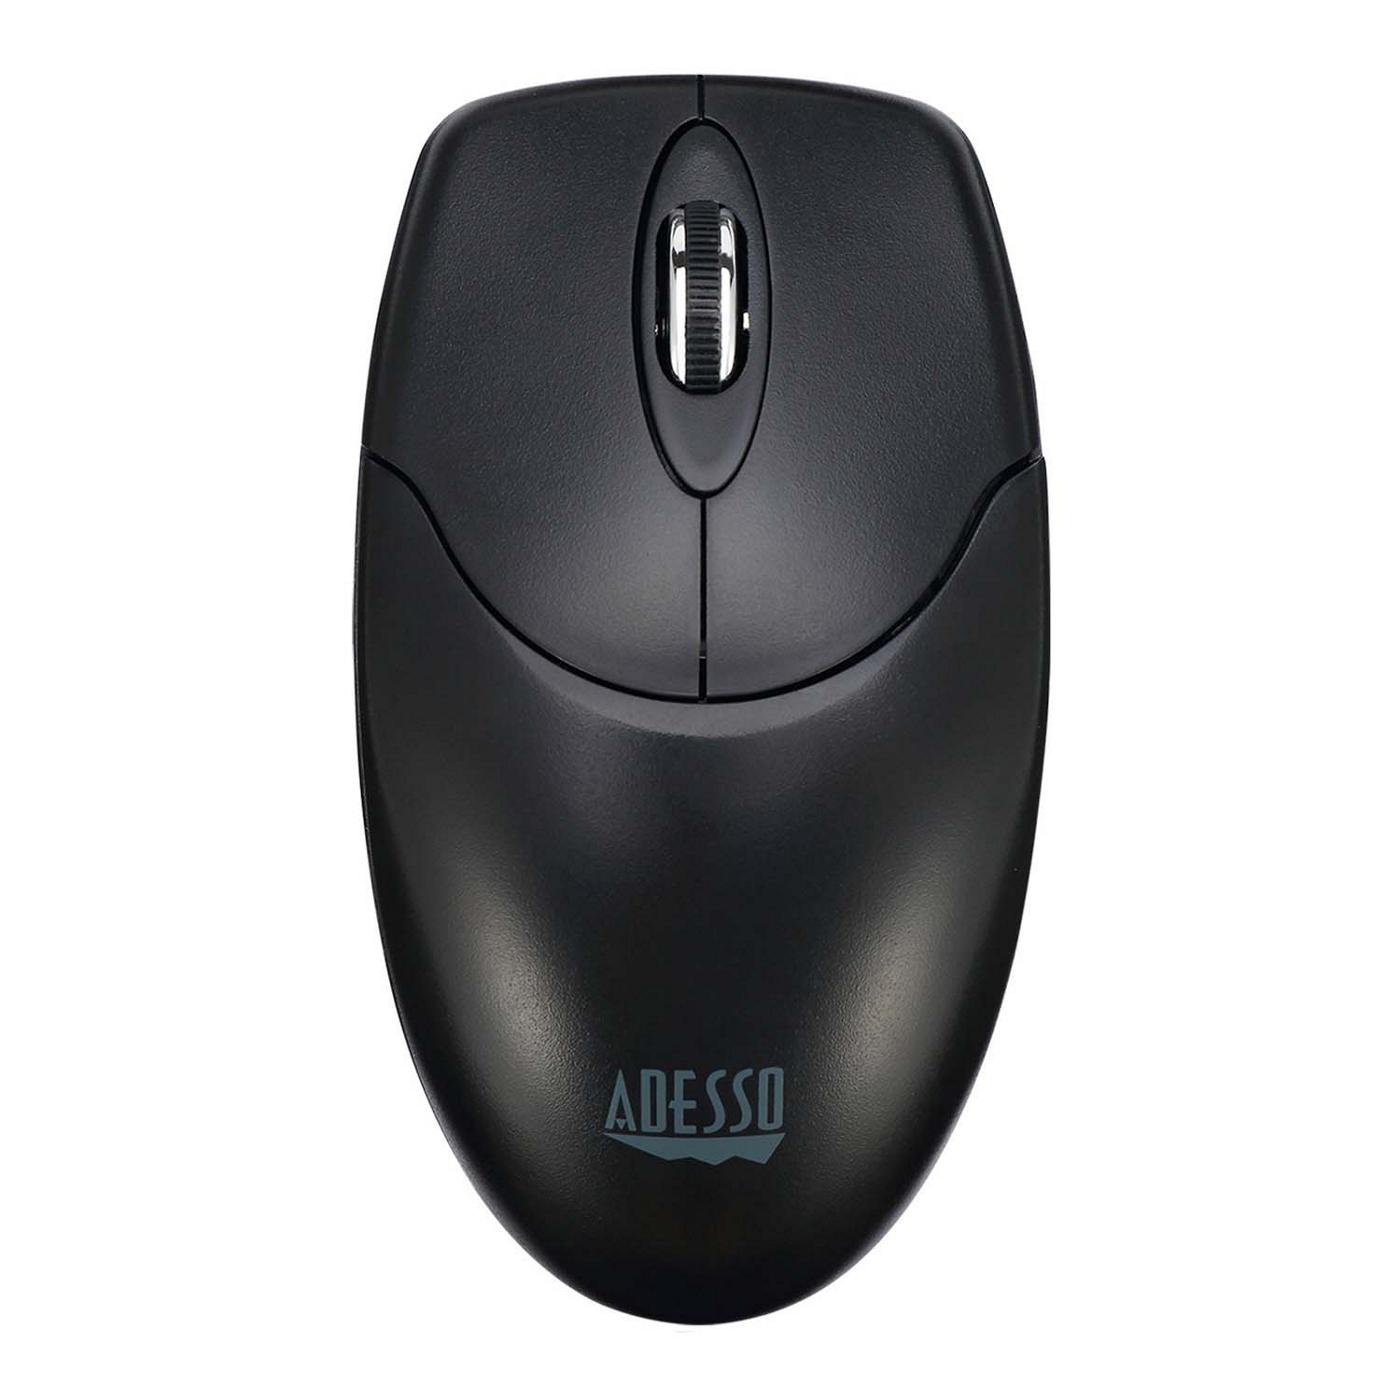 Adesso Wireless Bluetooth Keyboard And Mouse; image 2 of 2